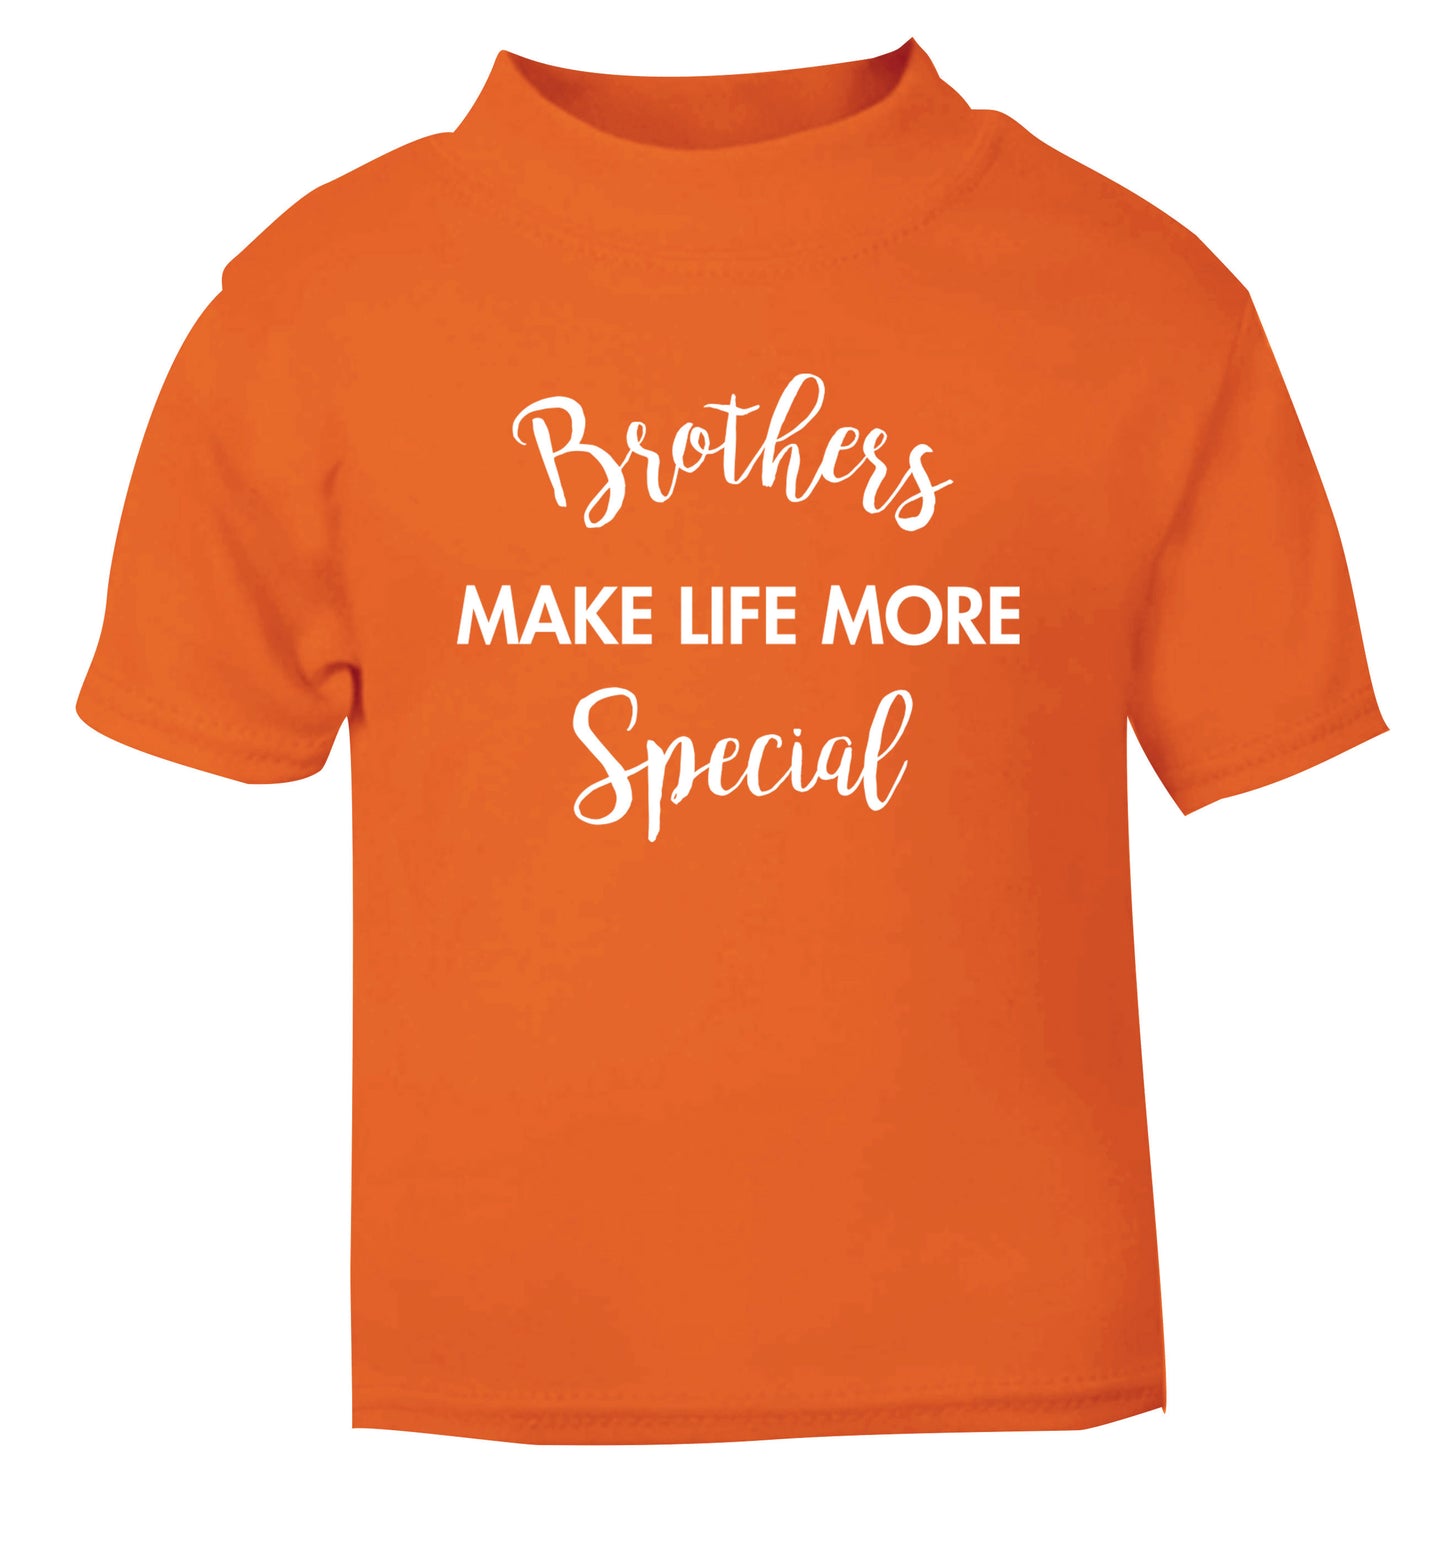 Brothers make life more special orange Baby Toddler Tshirt 2 Years